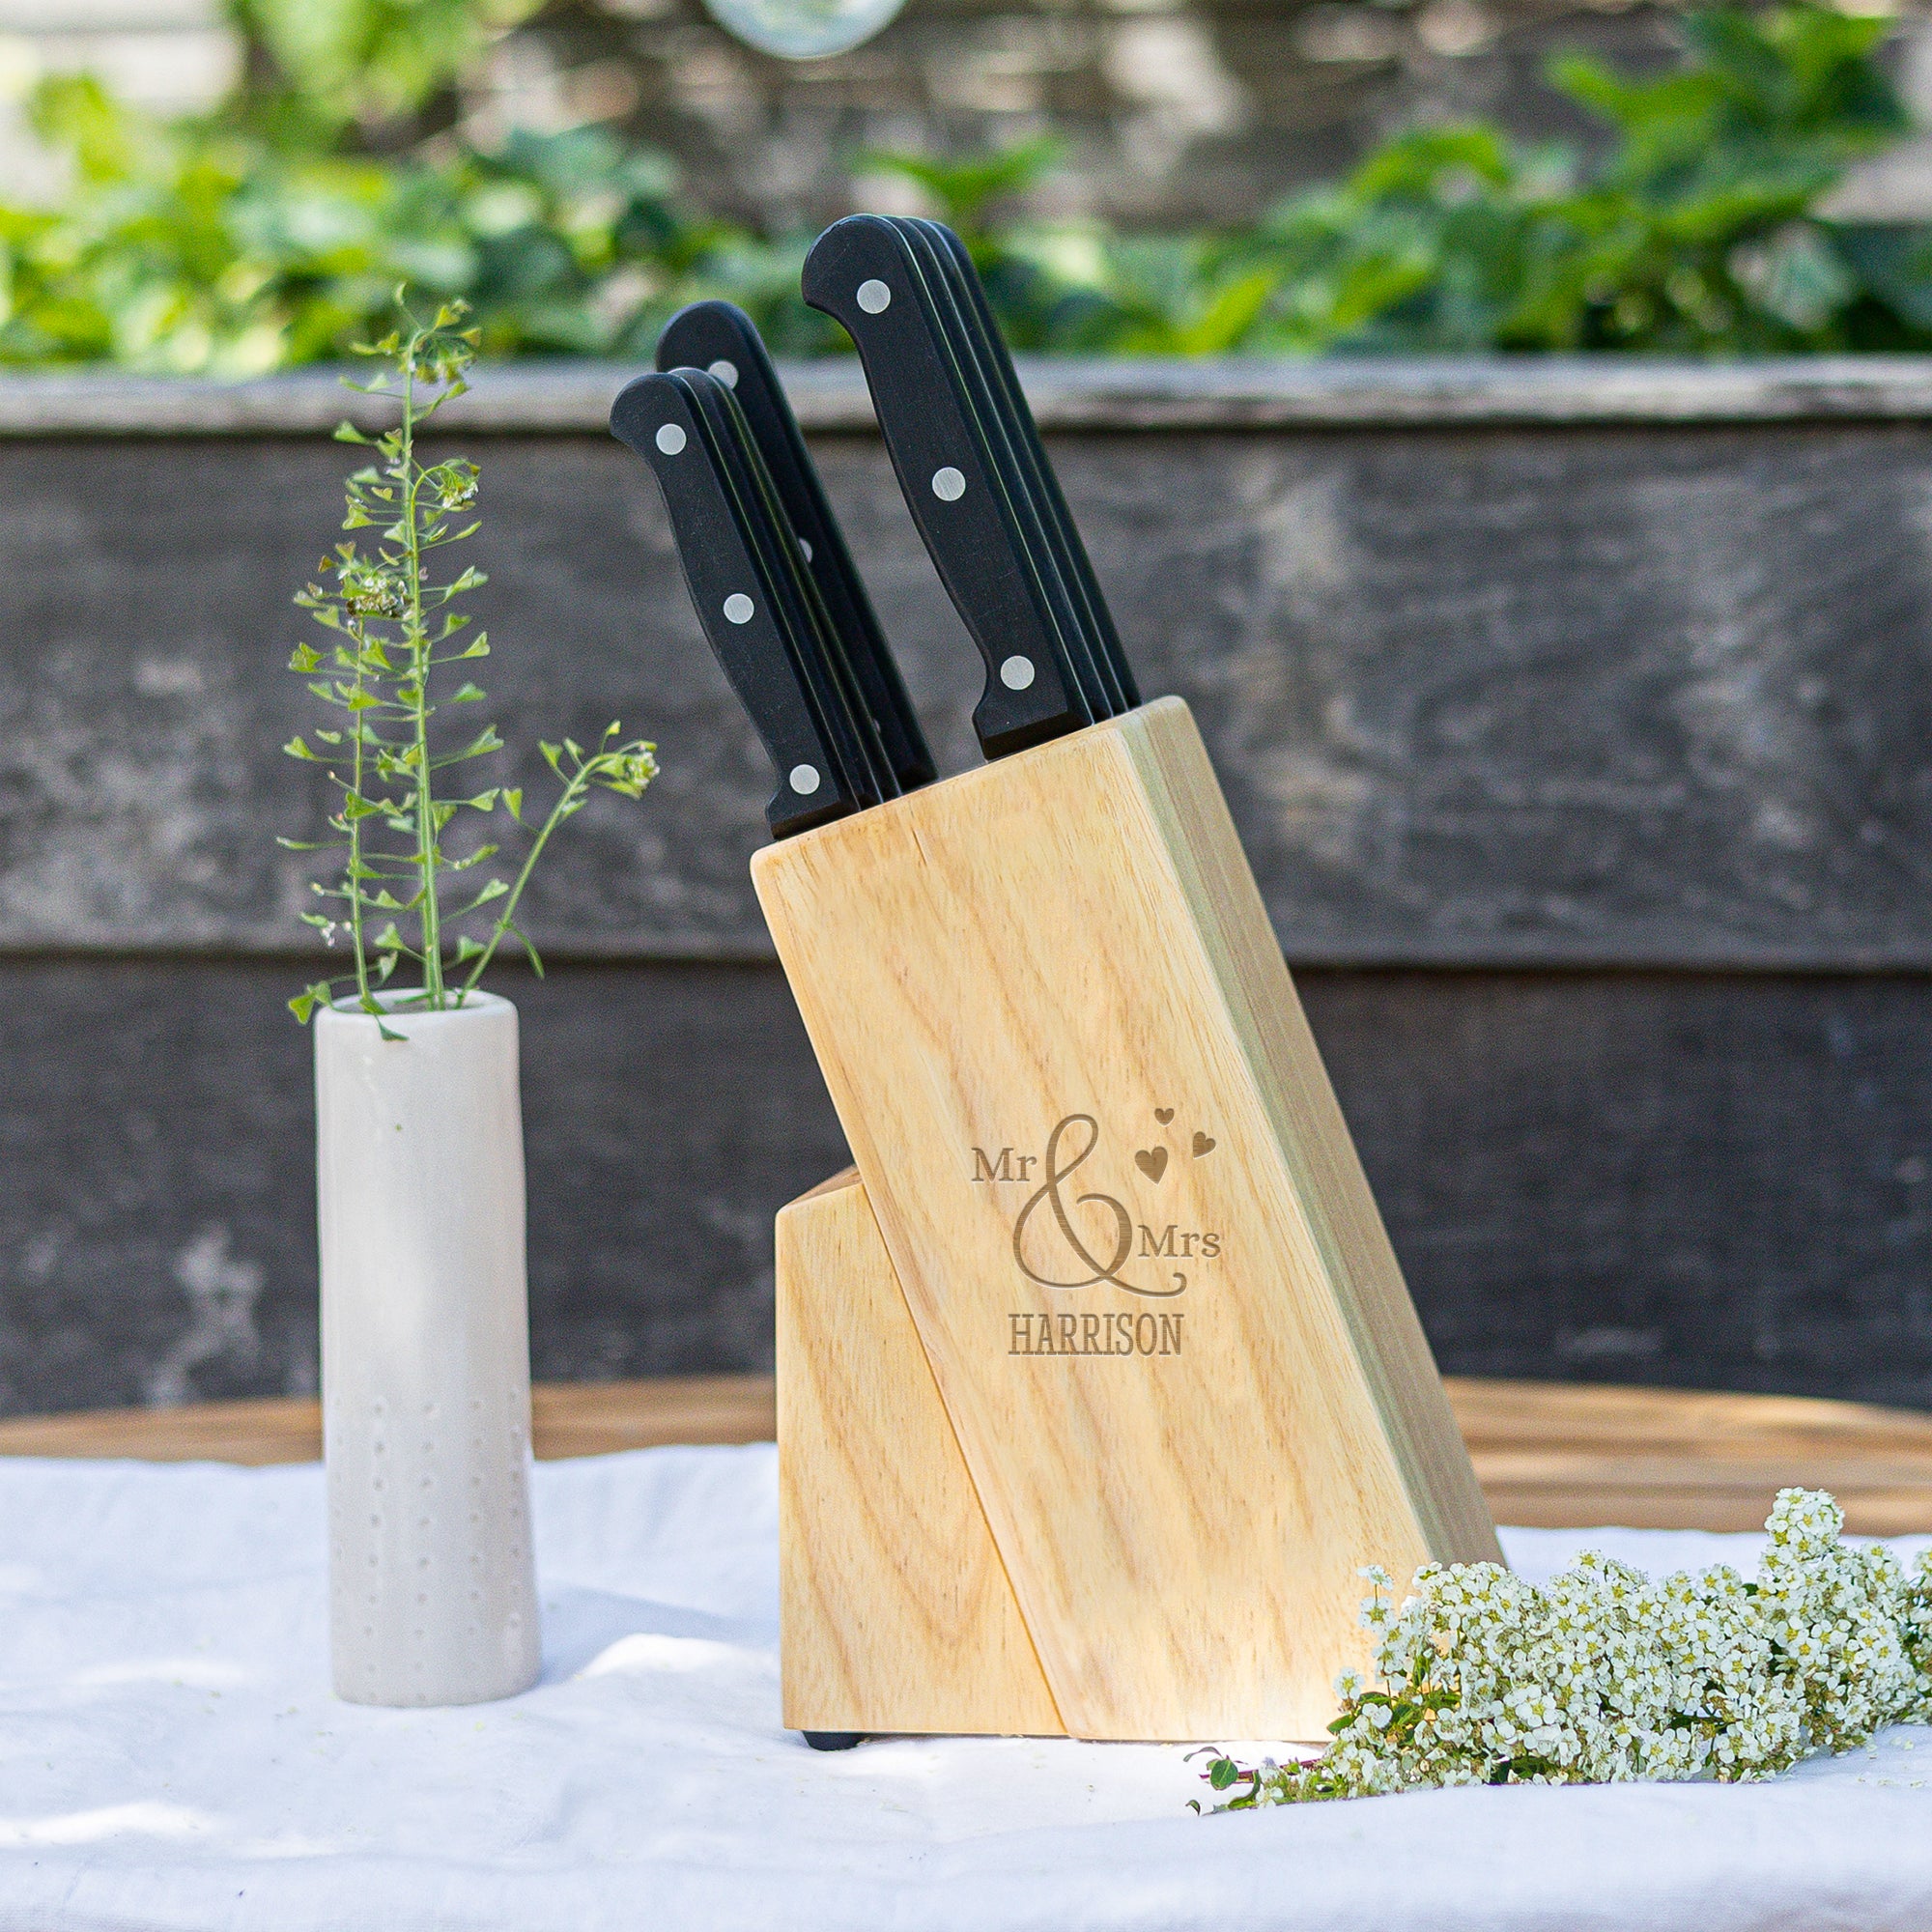 Personalised wooden knife block - Including knife set - Engraved (Right side)